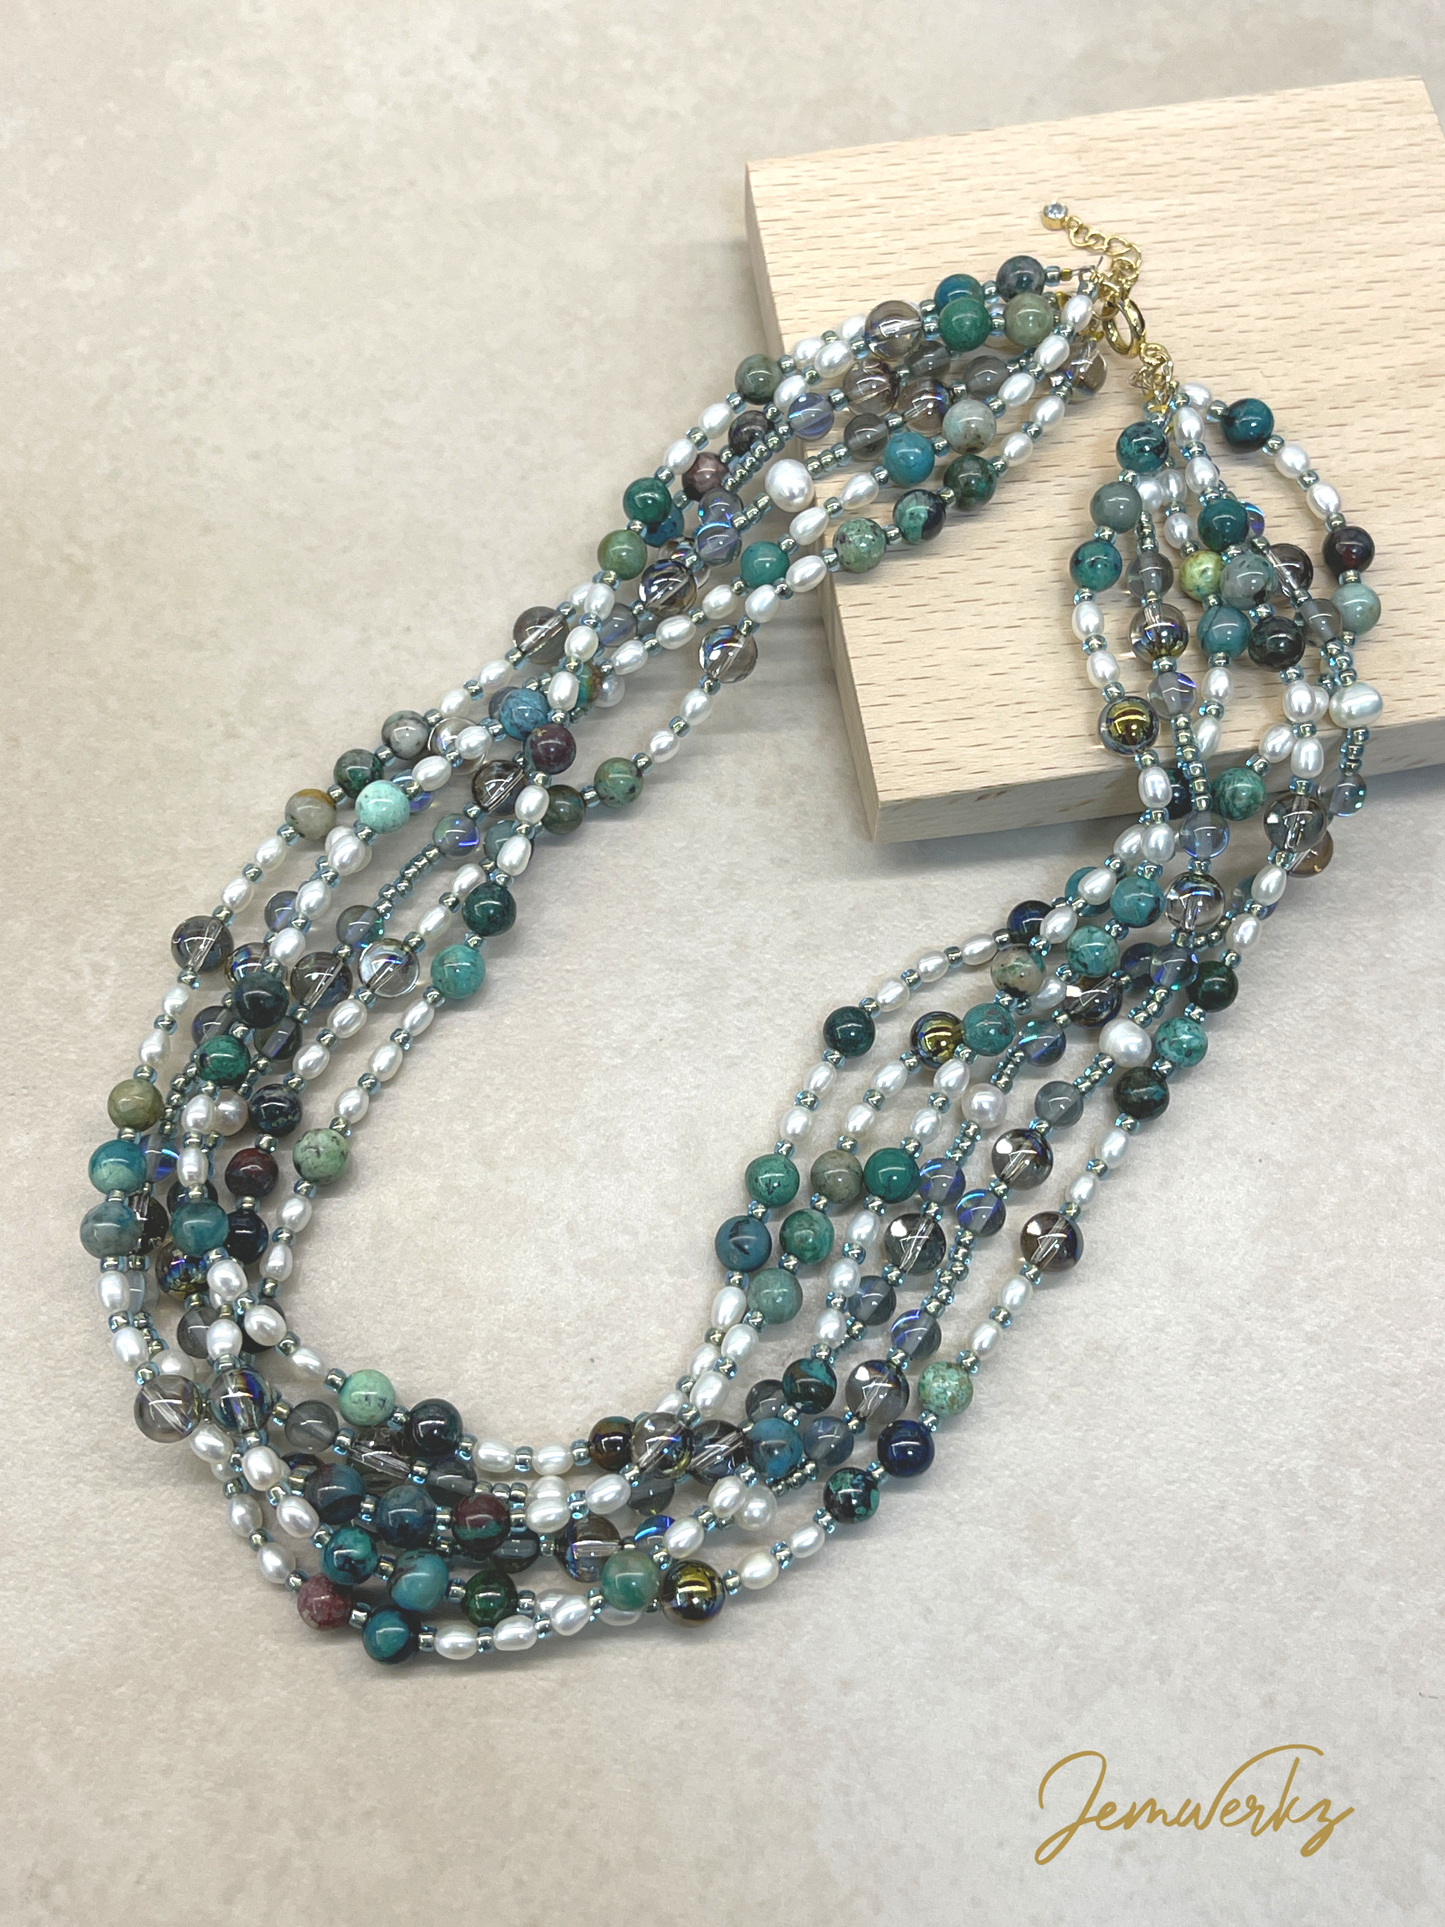 CARLY - Chrysocolla, Freshwater Pearls, Swarovski Crystal Beads Necklace